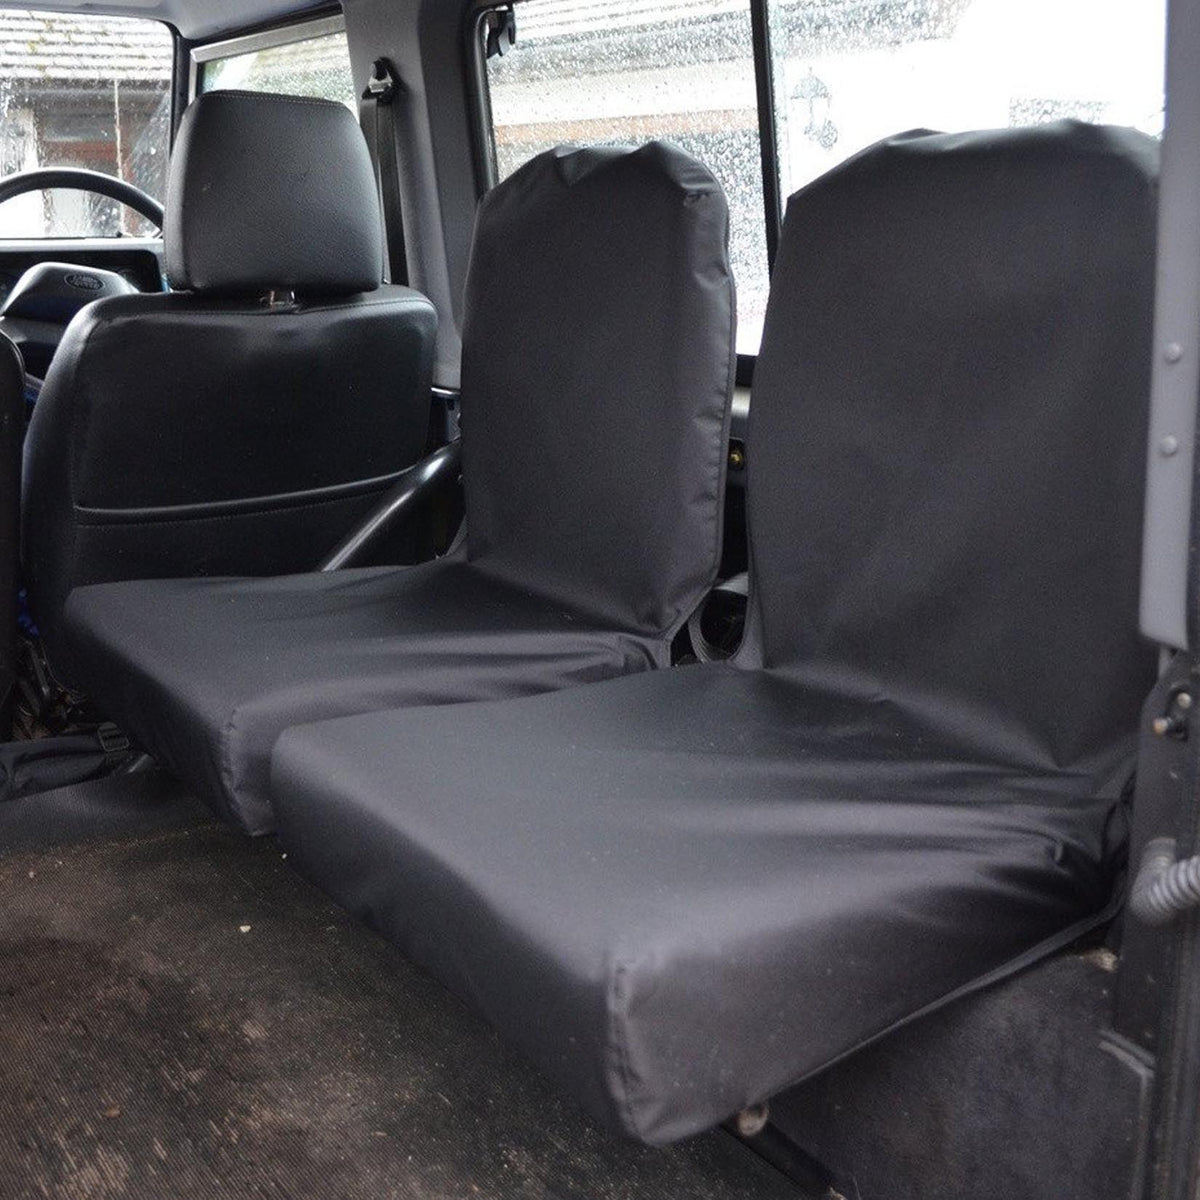 LAND ROVER DEFENDER 90 110 - 1983-2007 REAR SET OF 2 DICKY FOLDING SEAT COVERS - BLACK - Storm Xccessories2